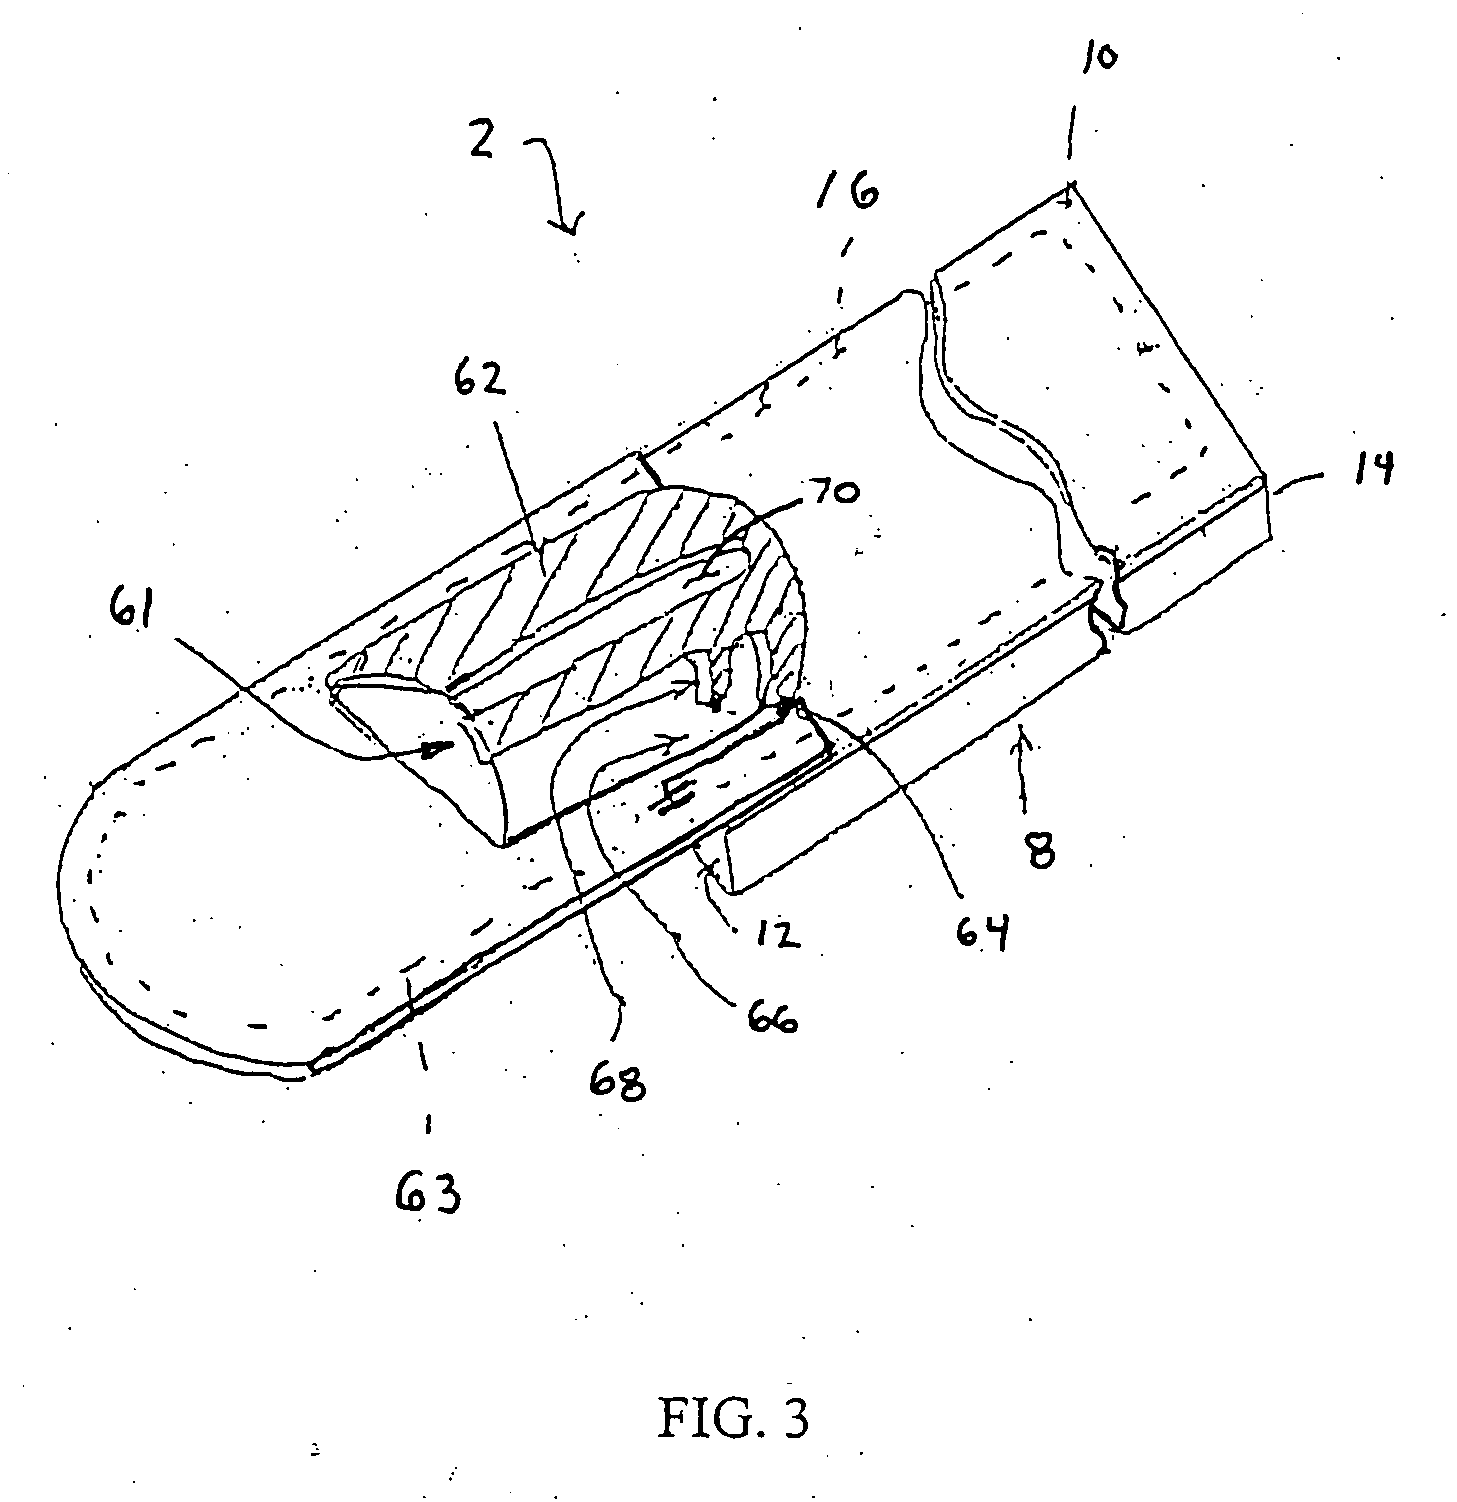 Oriented PIFA-type device and method of use for reducing RF interference